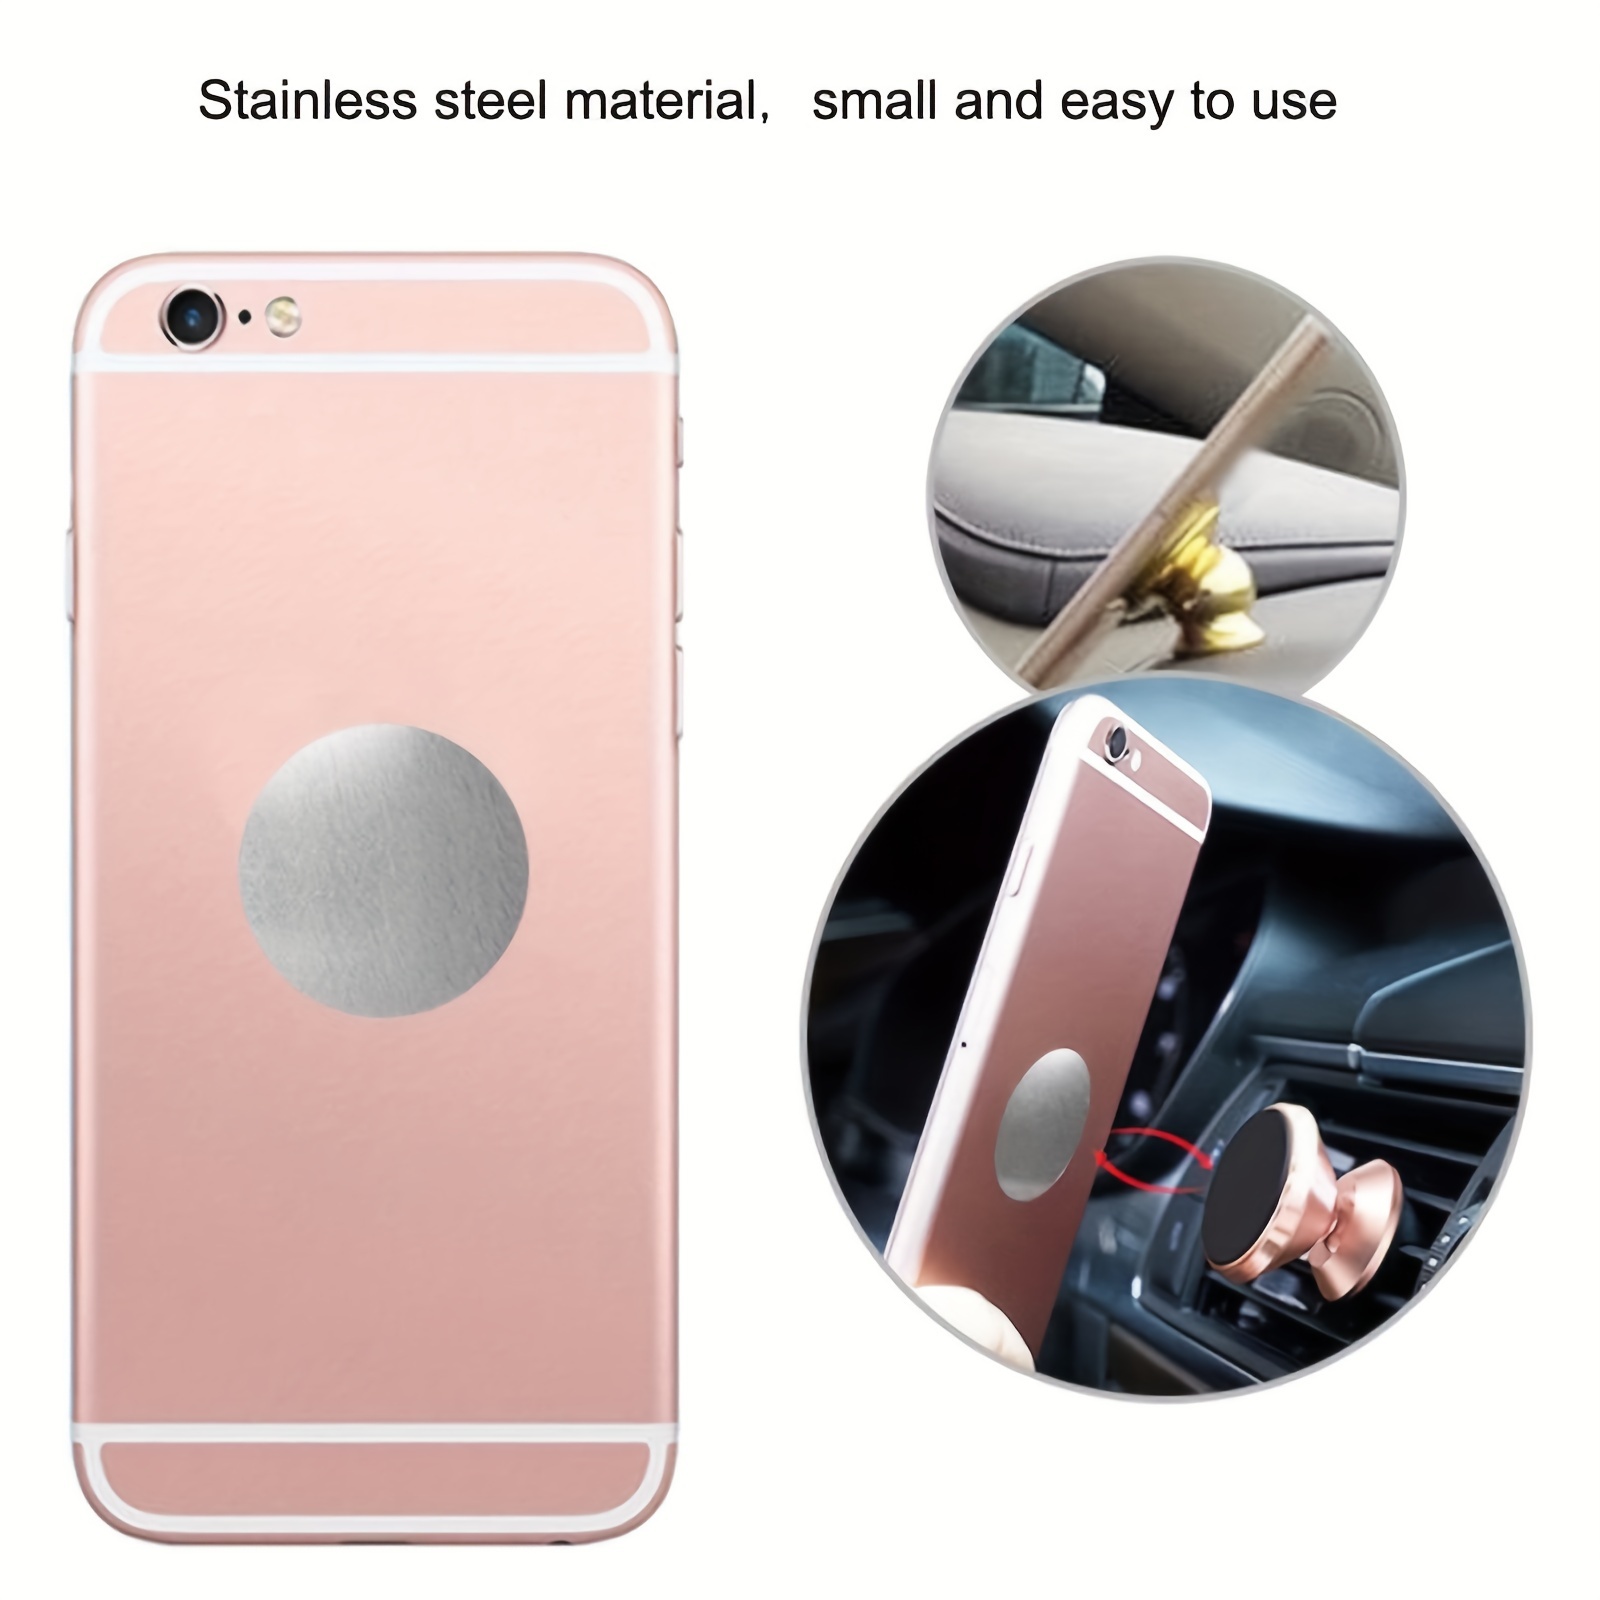 10pcs Mount Metal Plate For Magnetic Cell Phone Car Cradle, Round Sheet  With Adhesive For Magnet Phone Holder, Phone Metal Plate For Magnetic Mount  Ir